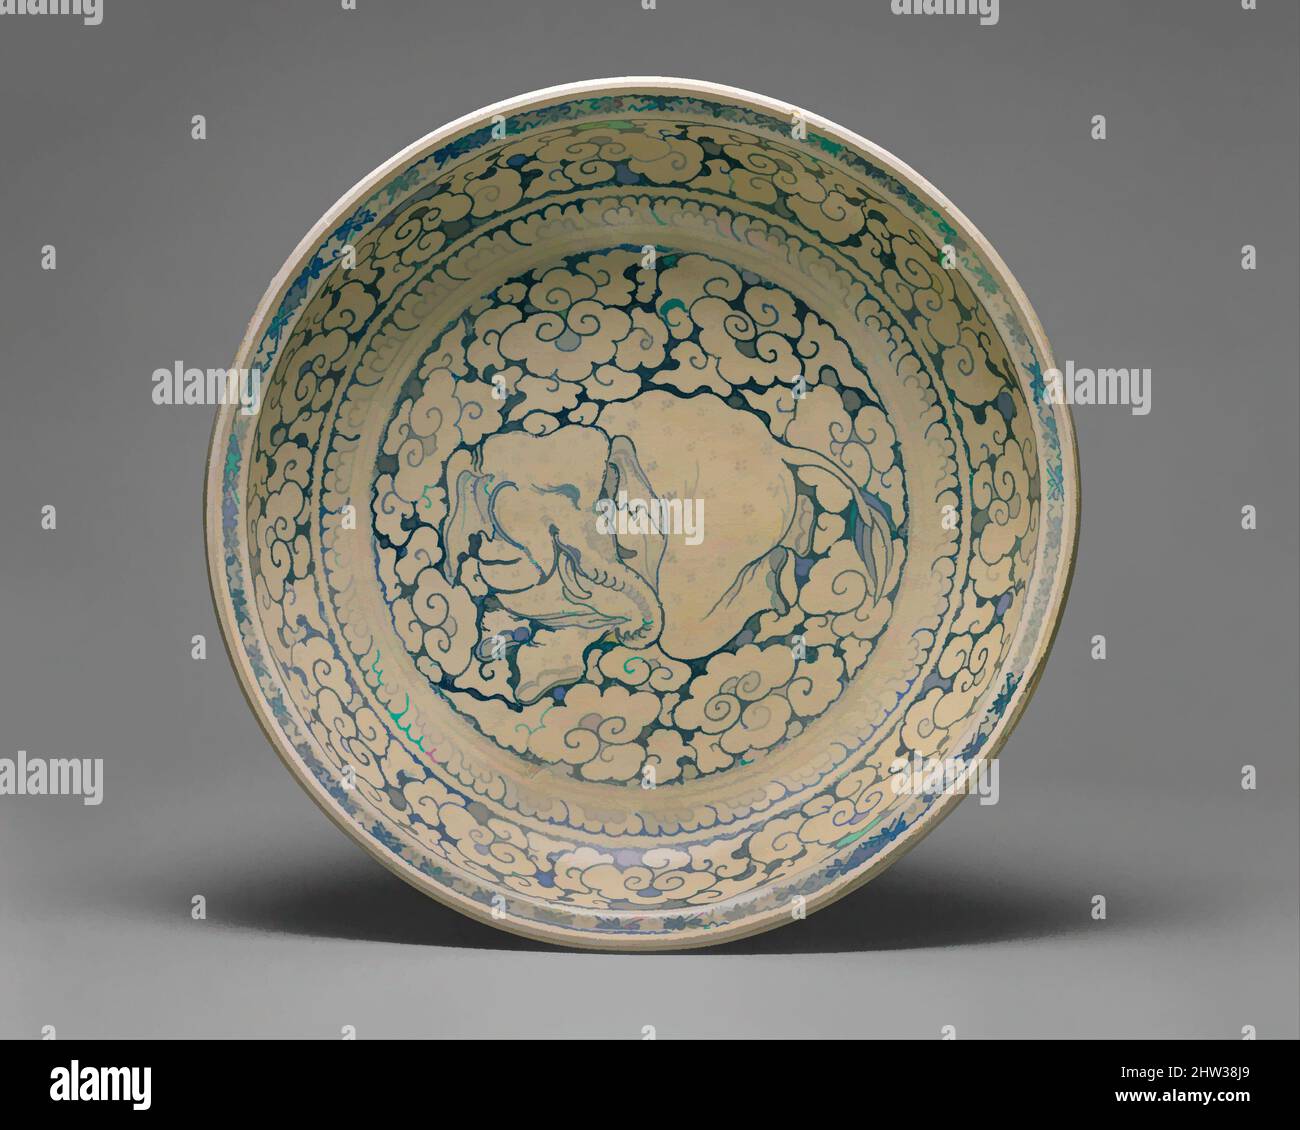 Art inspired by Dish with Recumbent Elephant Surrounded by Clouds, 15th–16th century, Vietnam, Stoneware with underglaze cobalt-blue decoration, Diam. 14 1/4 in. (36.2 cm), Ceramics, This exceptional dish, with its depiction of a kneeling elephant surrounded by abstract cloud, Classic works modernized by Artotop with a splash of modernity. Shapes, color and value, eye-catching visual impact on art. Emotions through freedom of artworks in a contemporary way. A timeless message pursuing a wildly creative new direction. Artists turning to the digital medium and creating the Artotop NFT Stock Photo